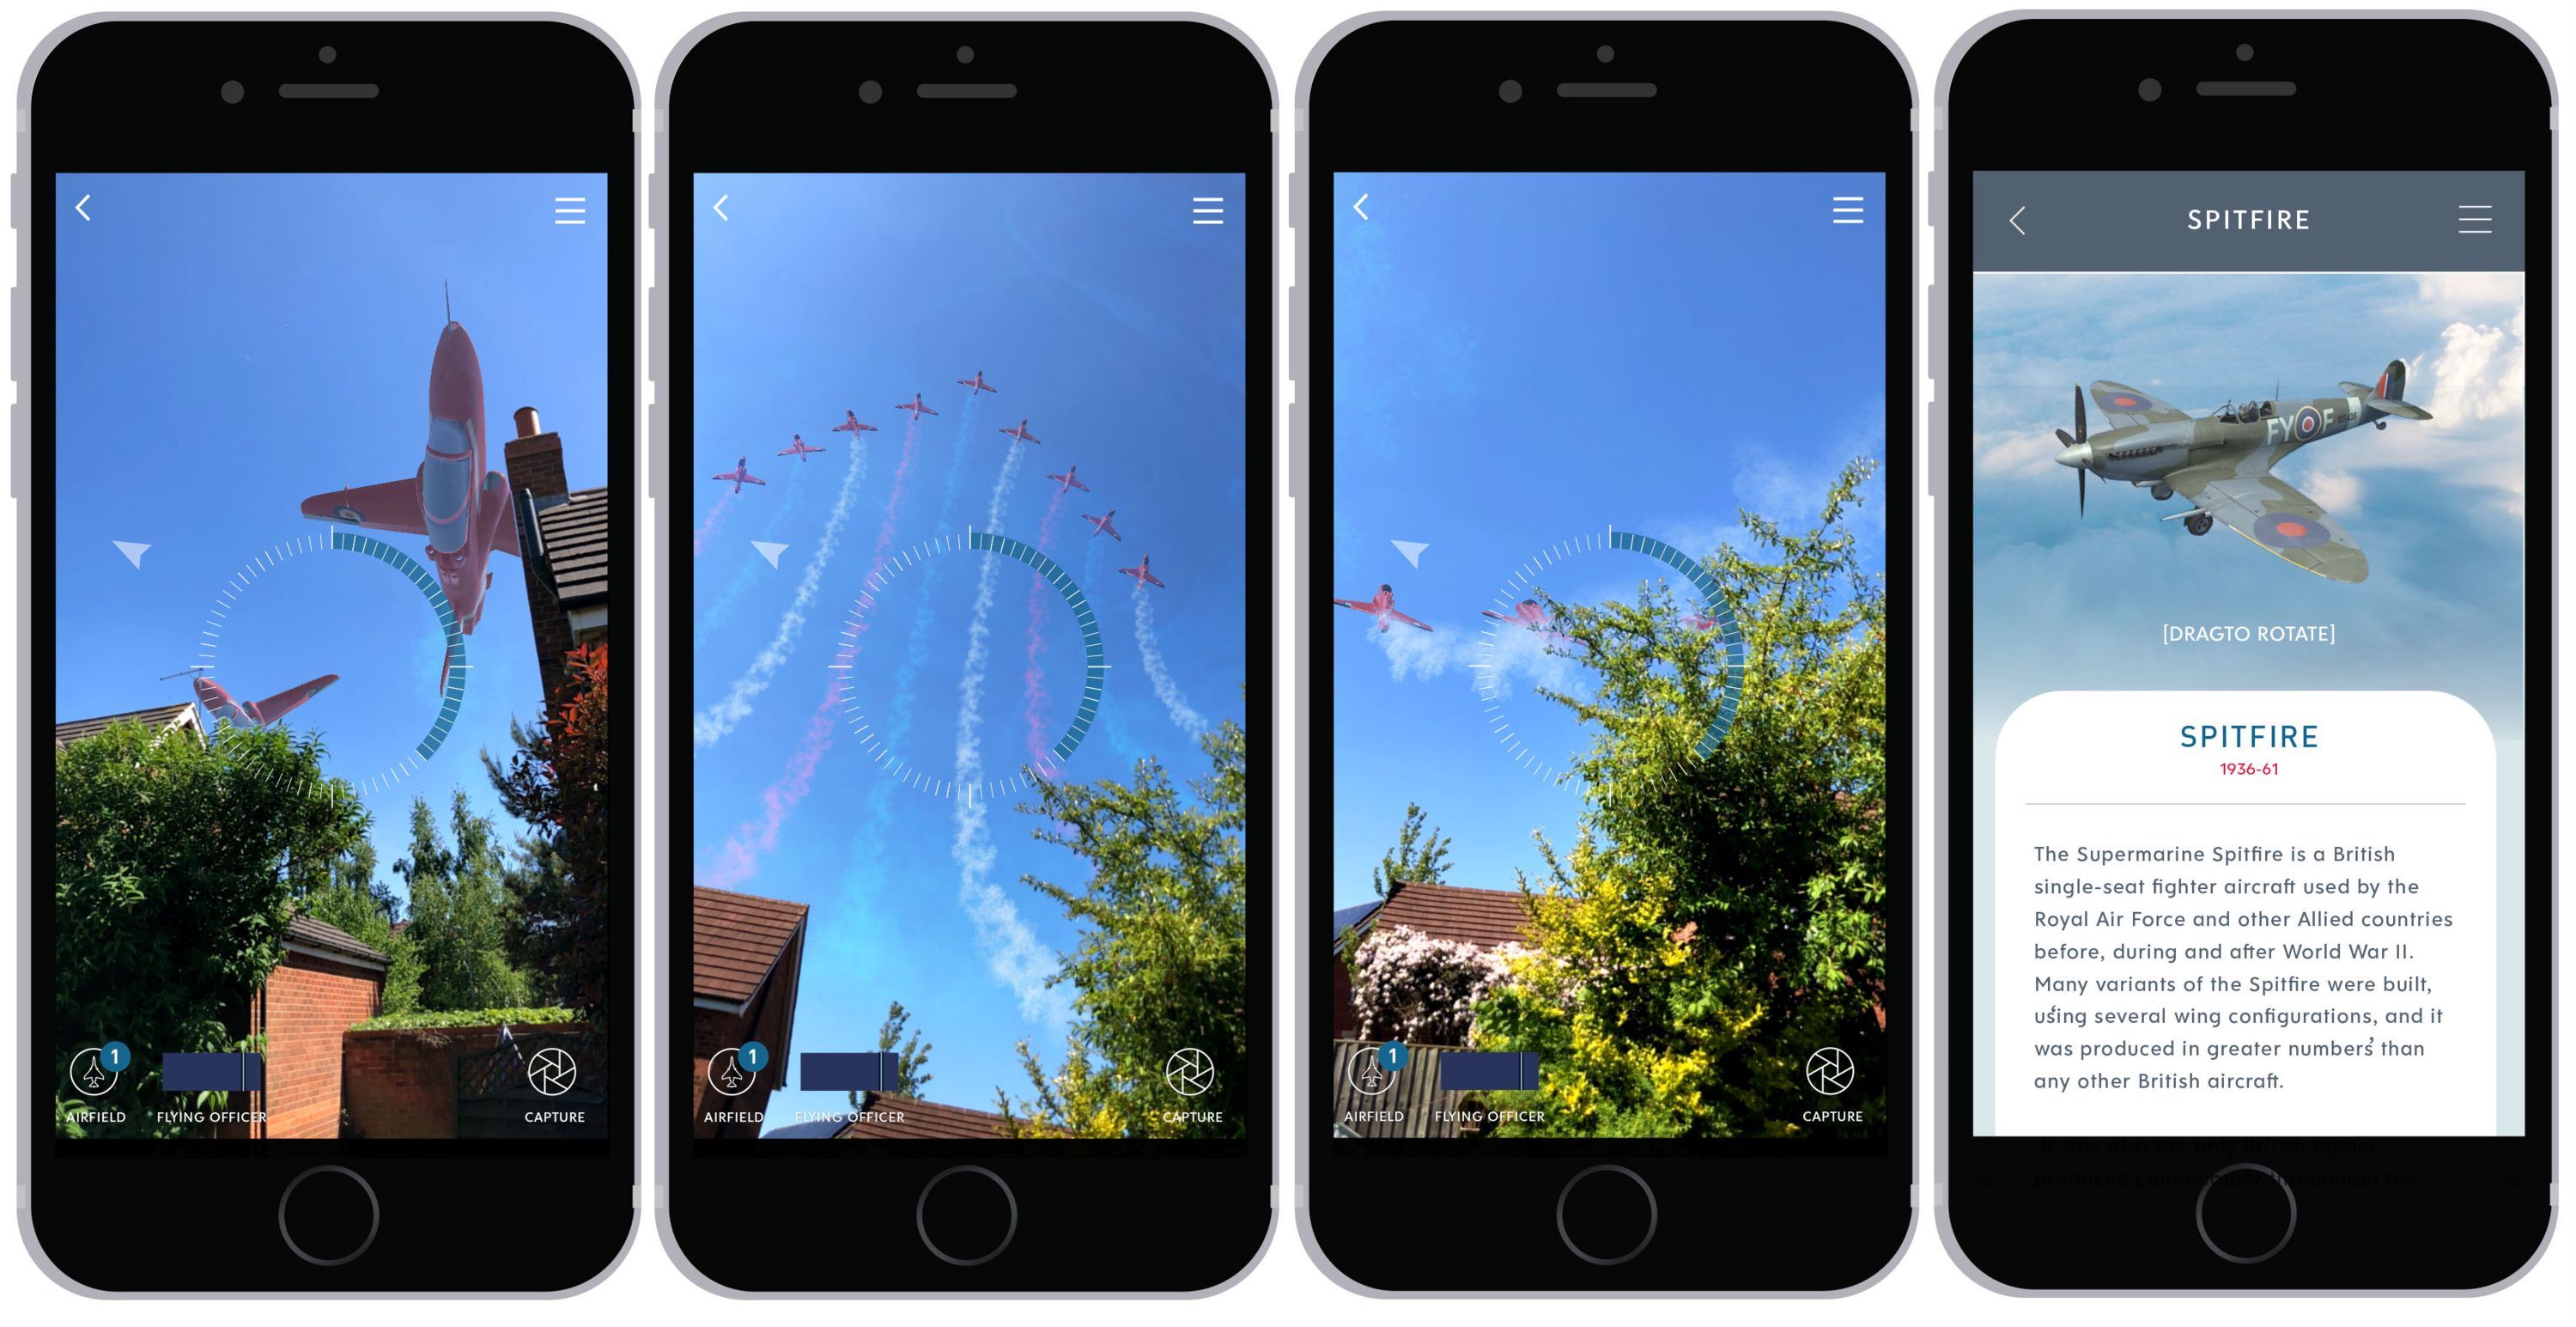 Four iphone screens showing the RAF100 flypast app in action, with images of planes overhead against a blue sky